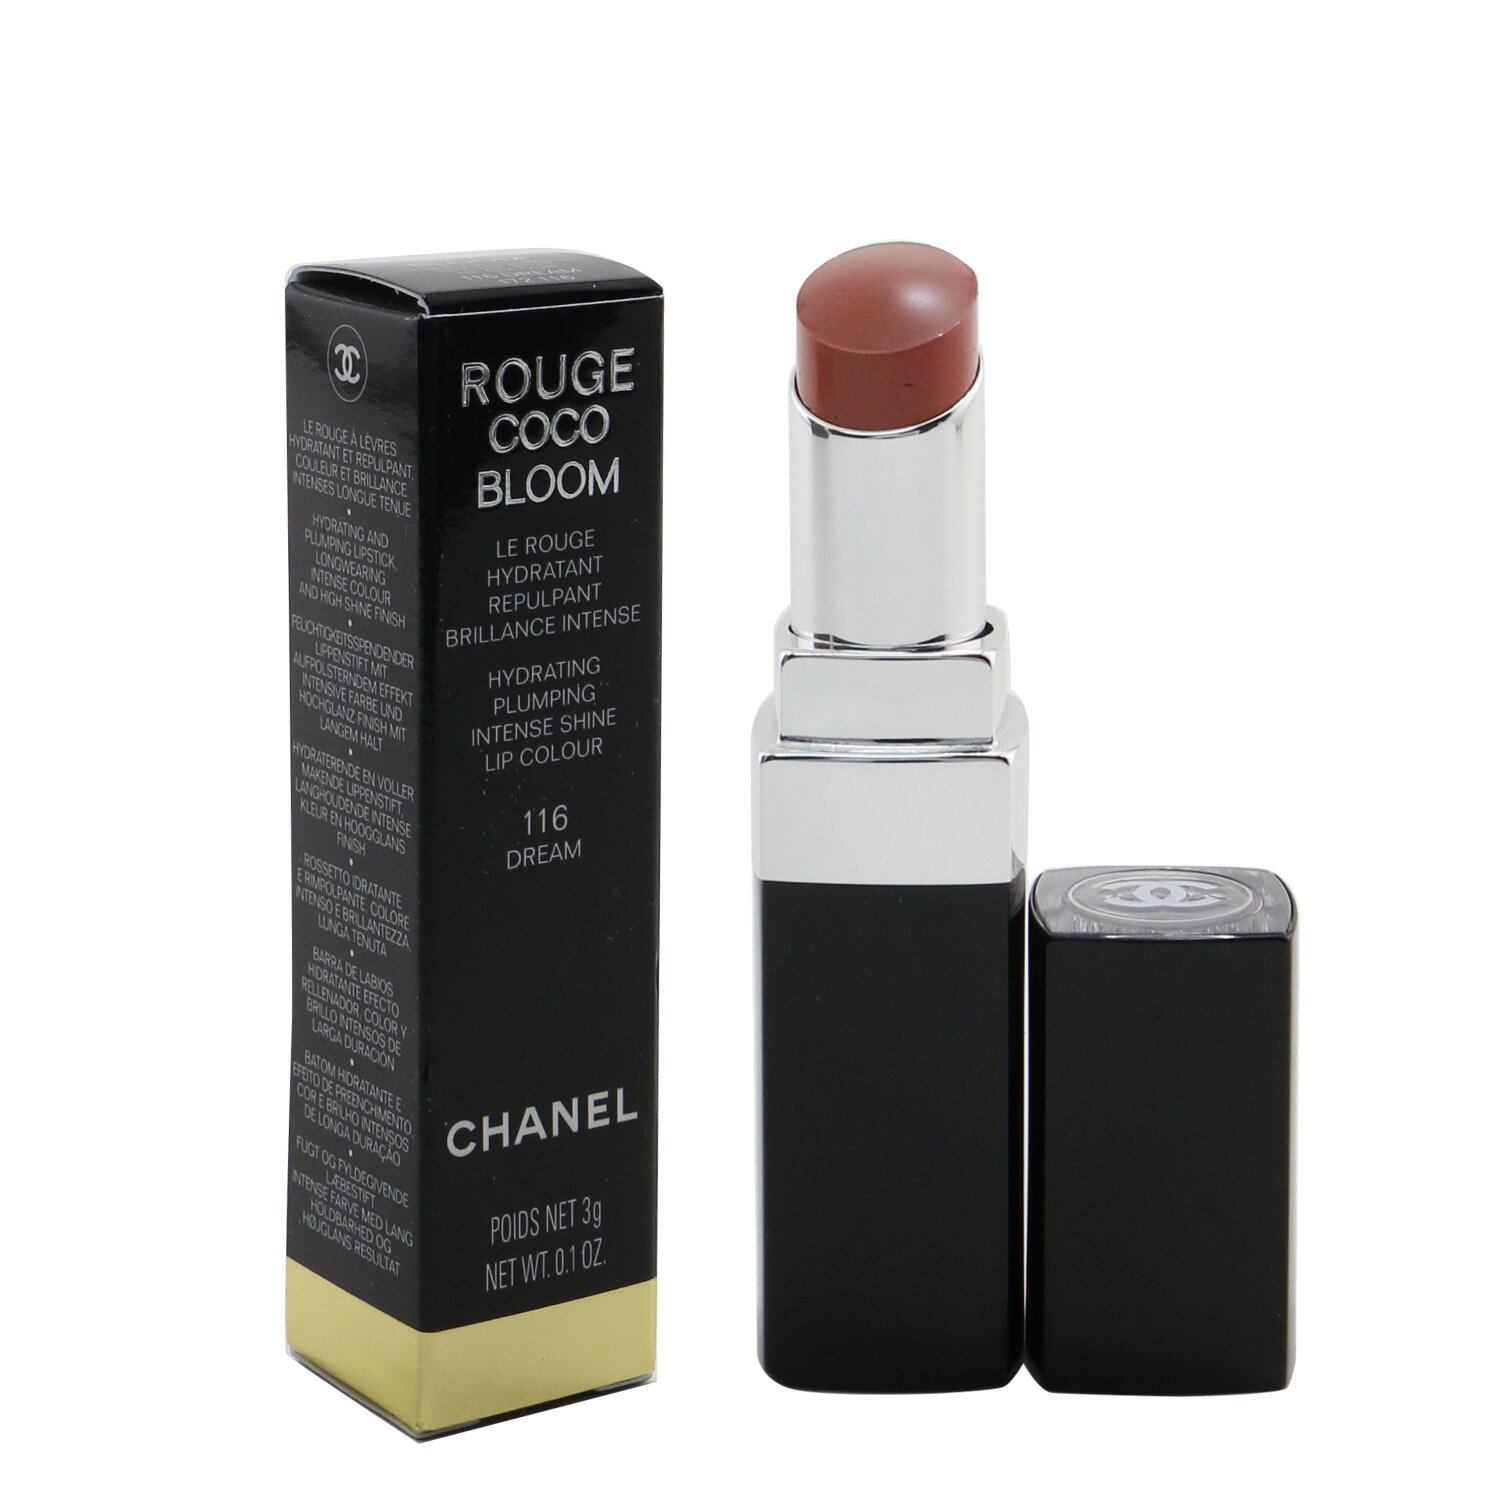 Chanel Rouge Coco Bloom Hydrating Plumping Intense Shine Lip Colour - 116 Dream